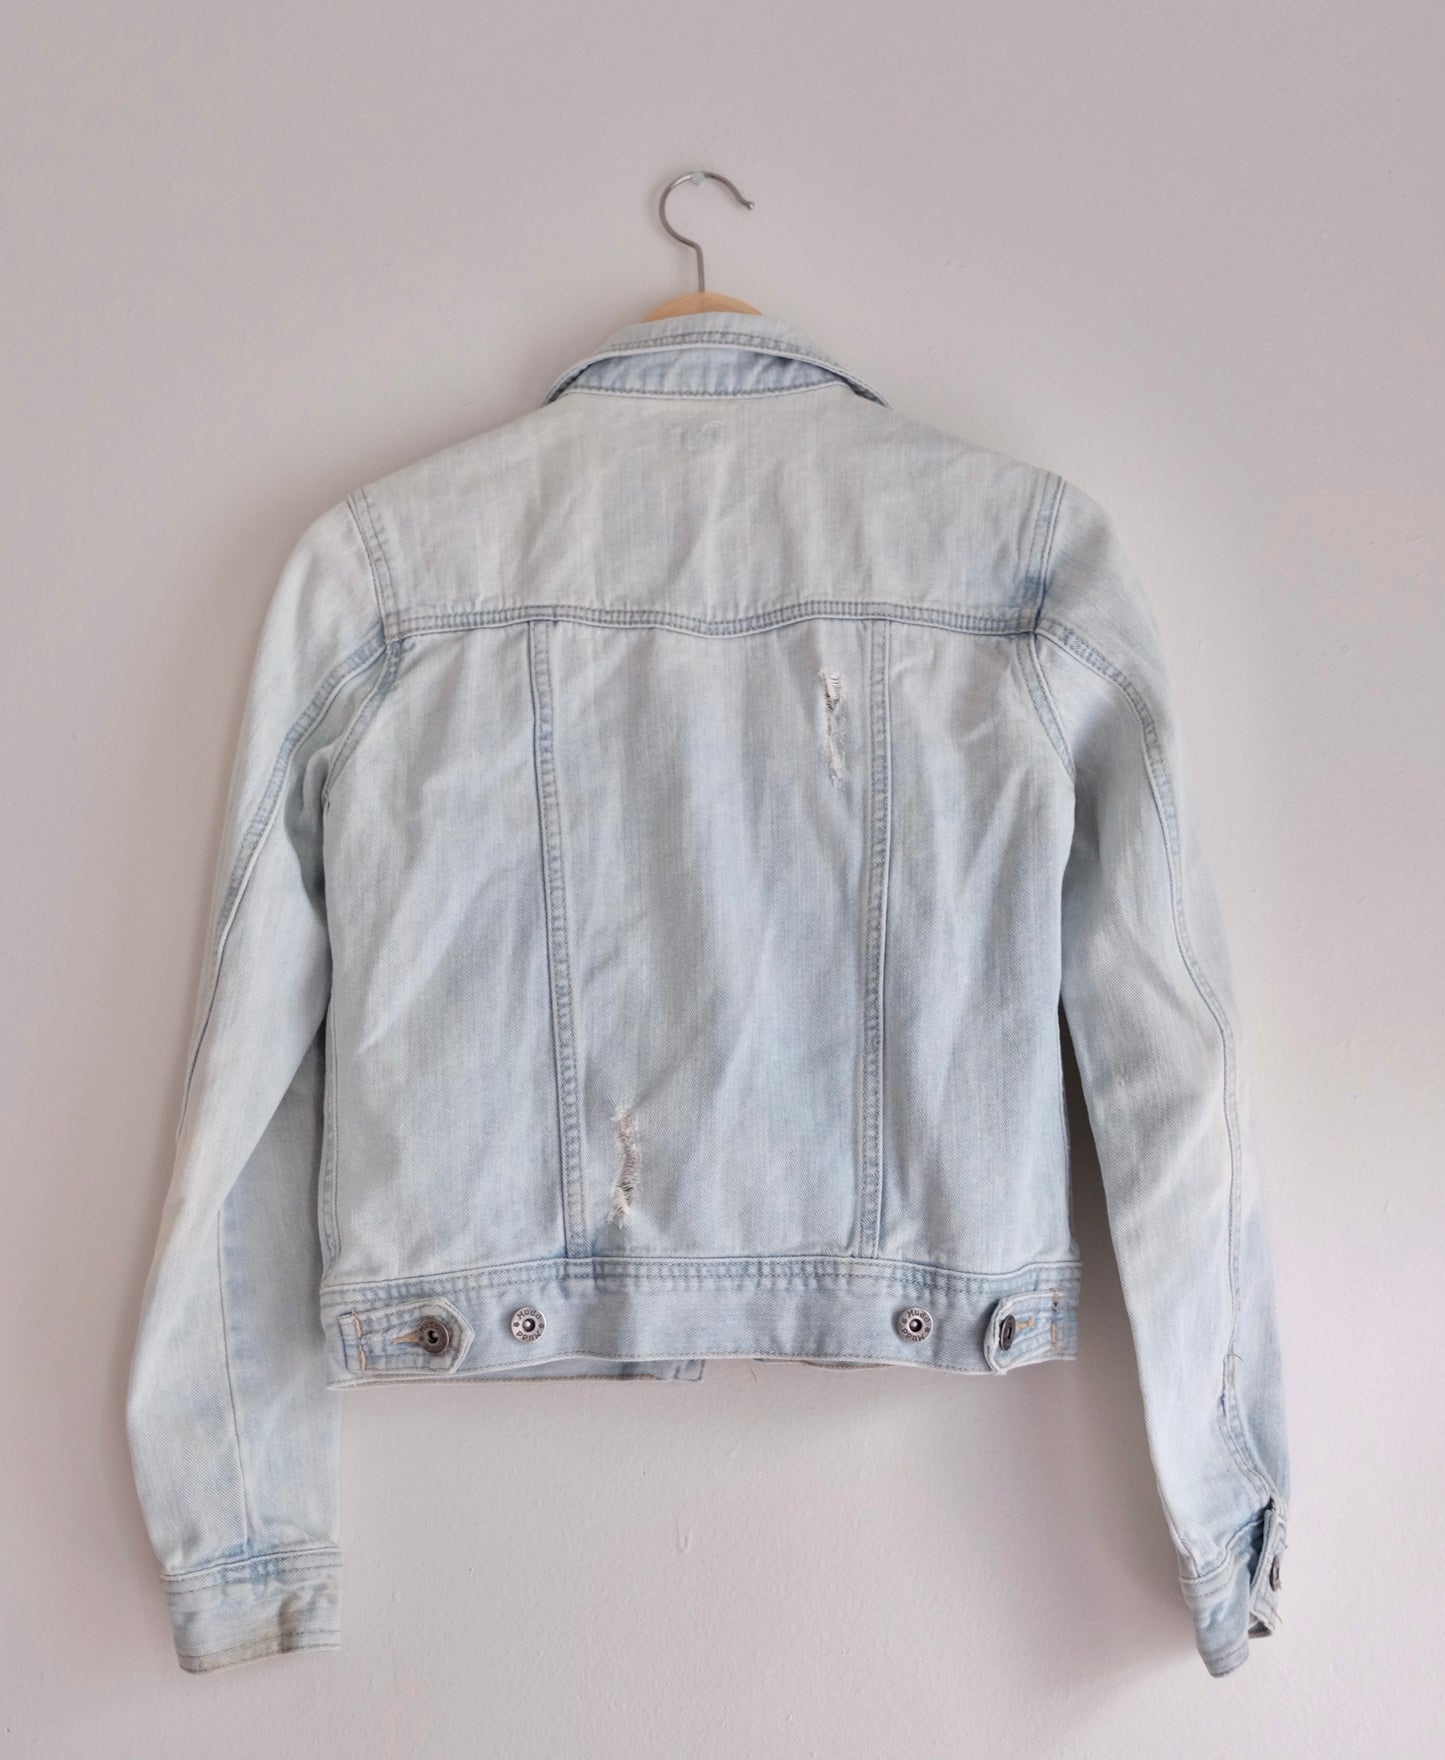 jean jacket with two hearts